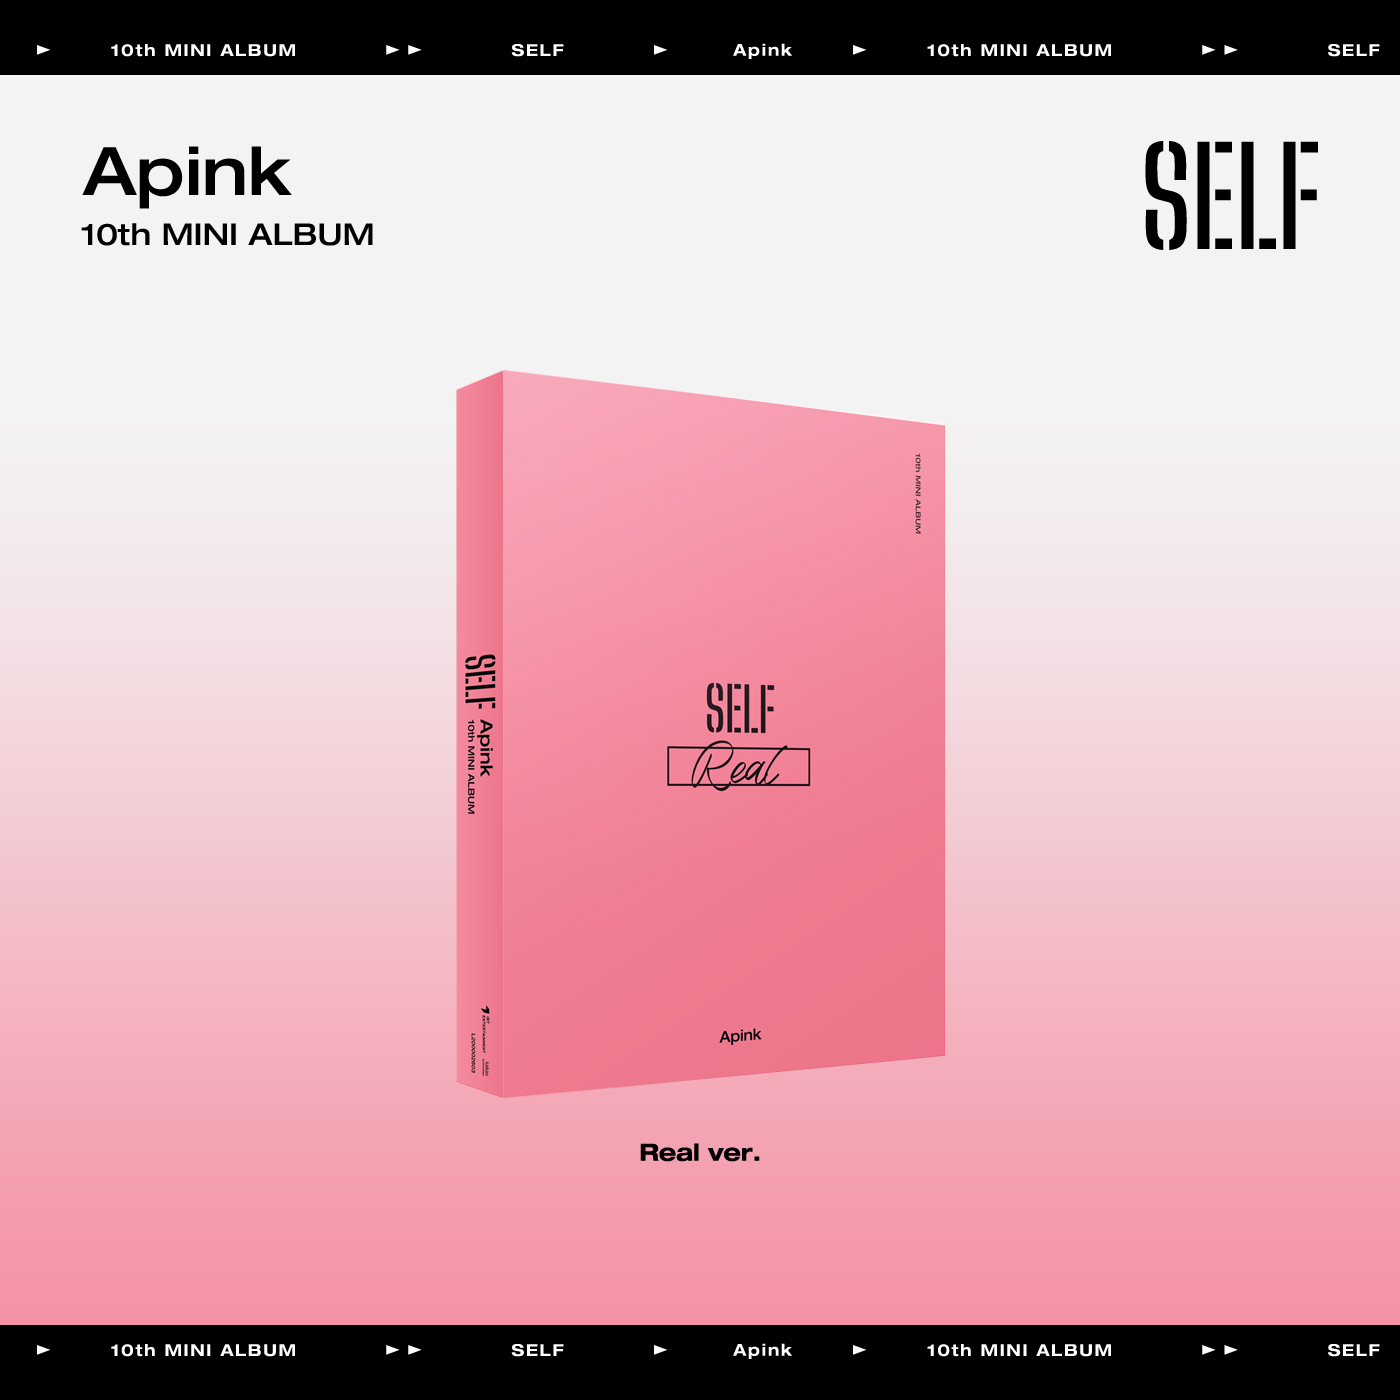 [Online Lucky Draw Event] Apink - 10th Mini Album [SELF] (Real ver.) **NON-REFUNDABLE**